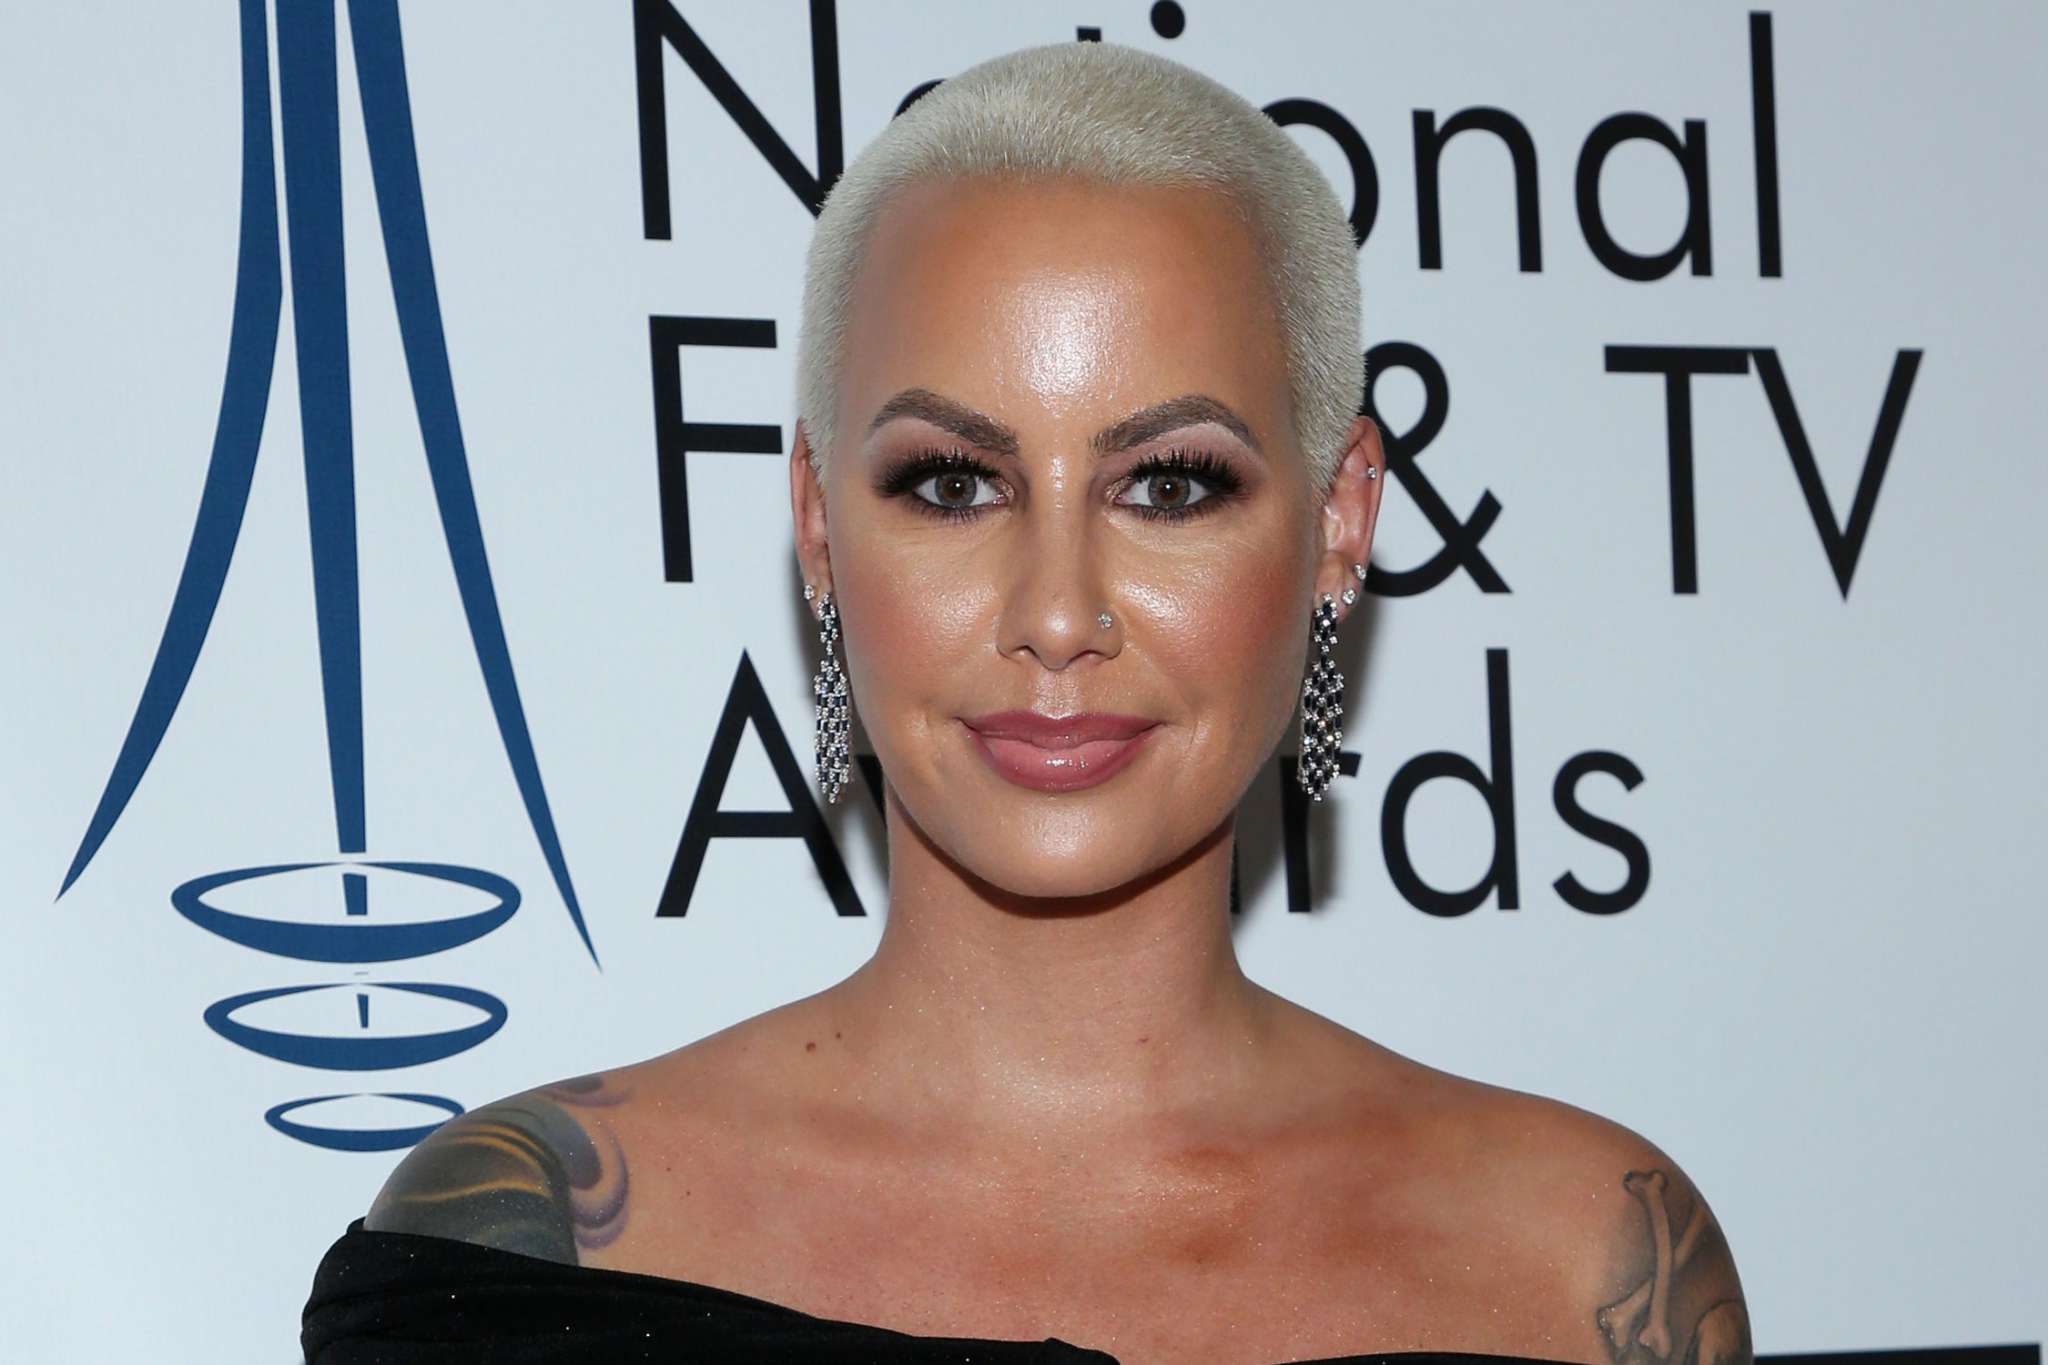 Amber Rose Drops A Message For T.I.; Says She Stands With The LGBTQ Community